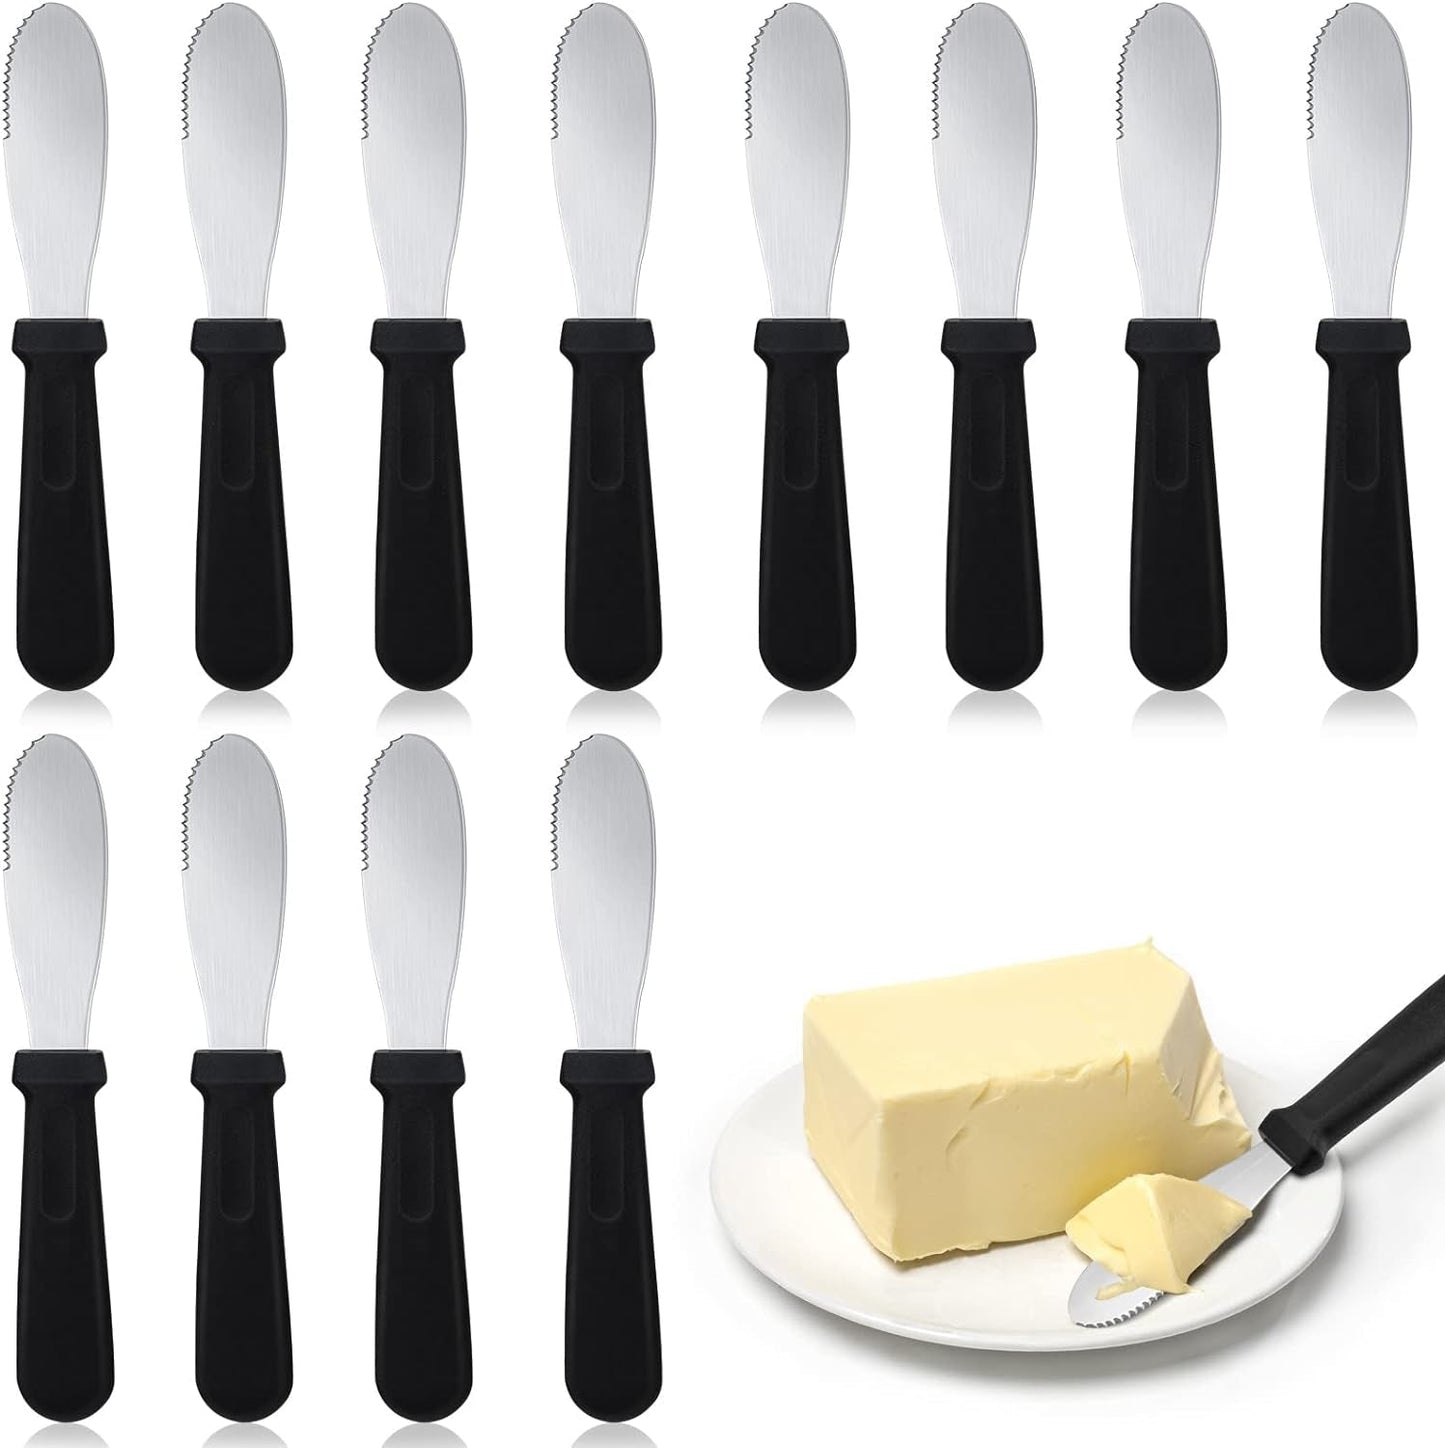 12 Pcs Butter Spreader Knives Wide Blade Stainless Steel Cheese Spreader Knife Black Plastic Handle Slicing or Spreading Knife for Slicing Bread Cream Sandwich Condiment Spreader Kitchen 9.1 Inch  Cunno   